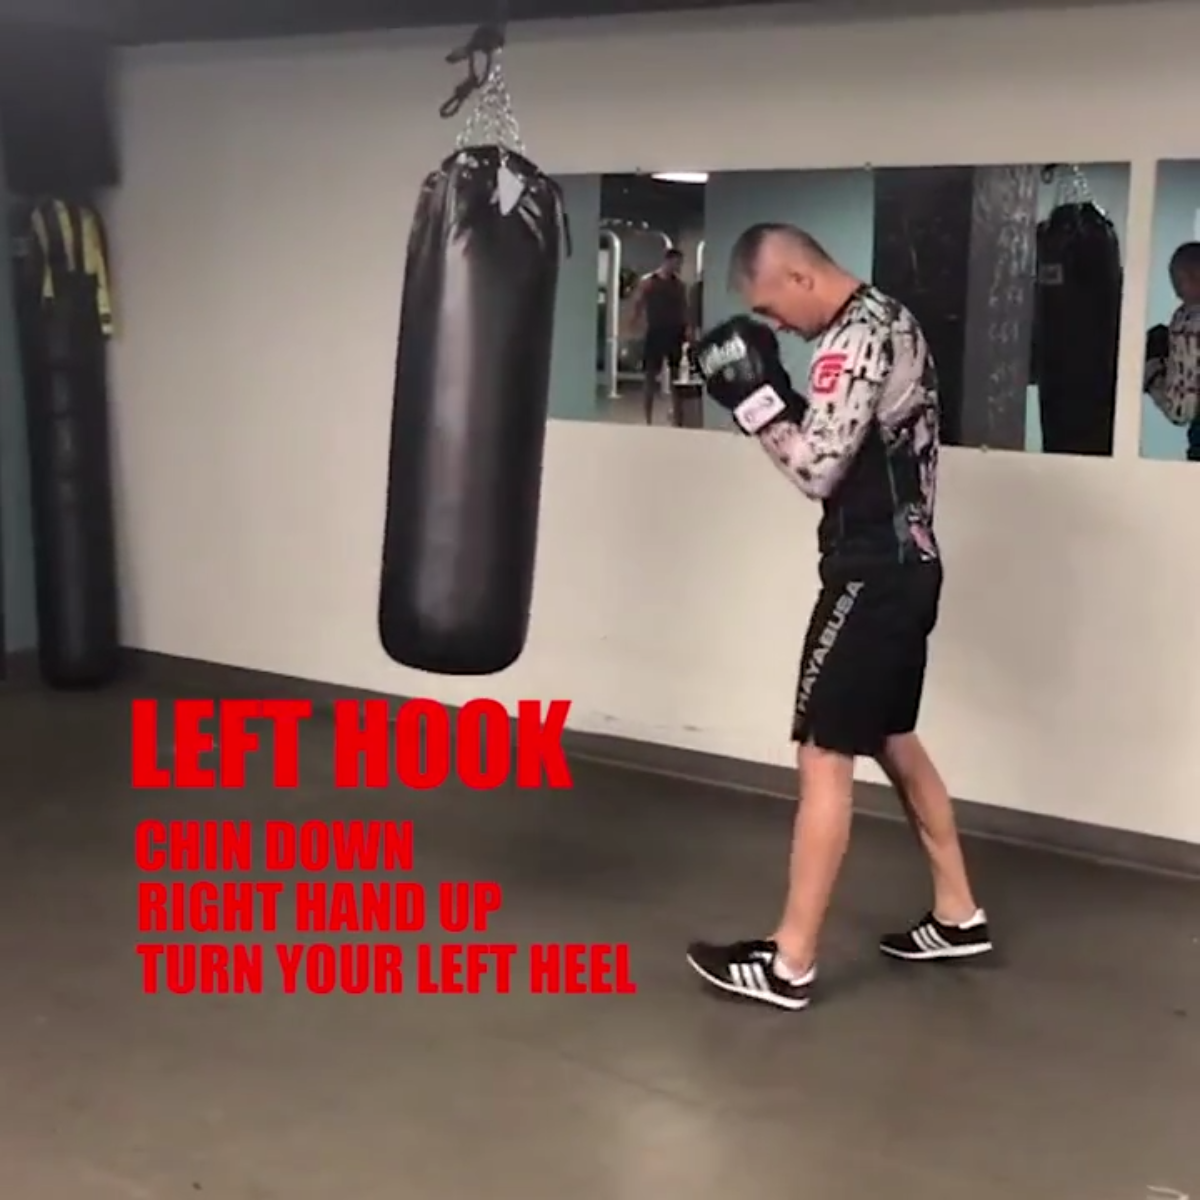 https://www.infighting.ca/wp-content/uploads/Beginner-Boxing-Drill-A-Simple-Way-To-Learn-The-Left-Hook-1200x1200.png